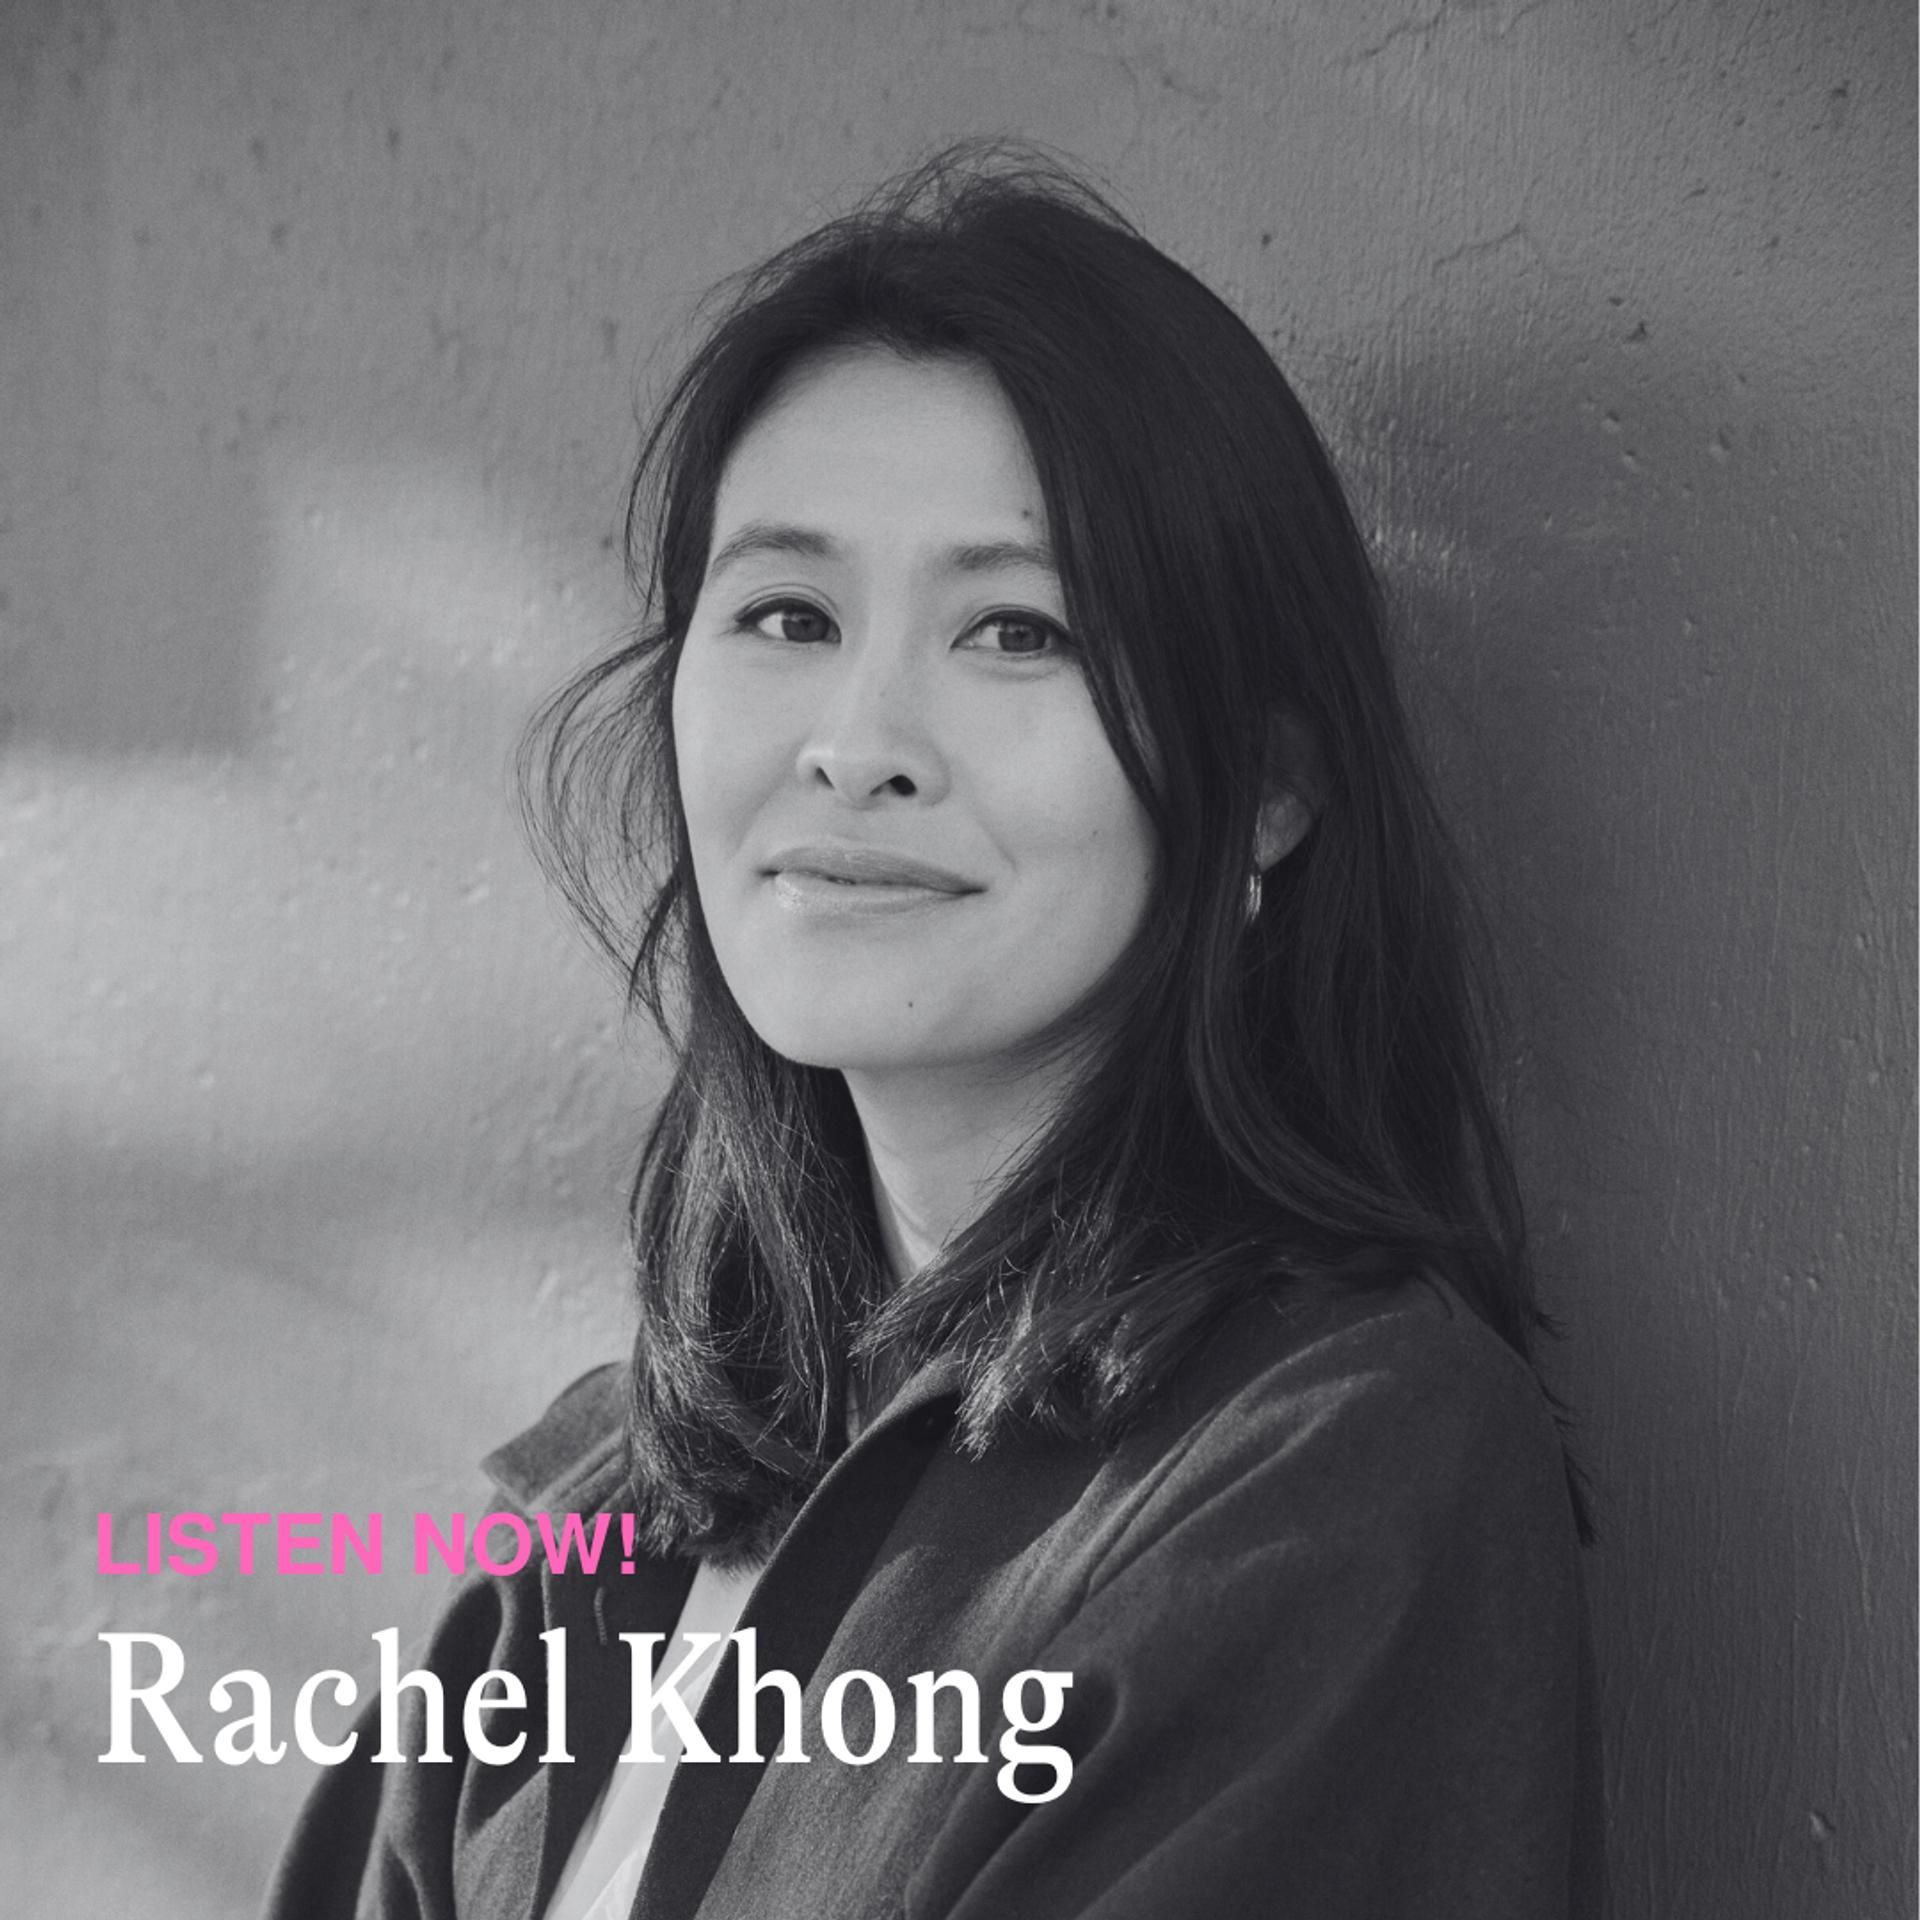 Rachel Khong on What Makes a Real American